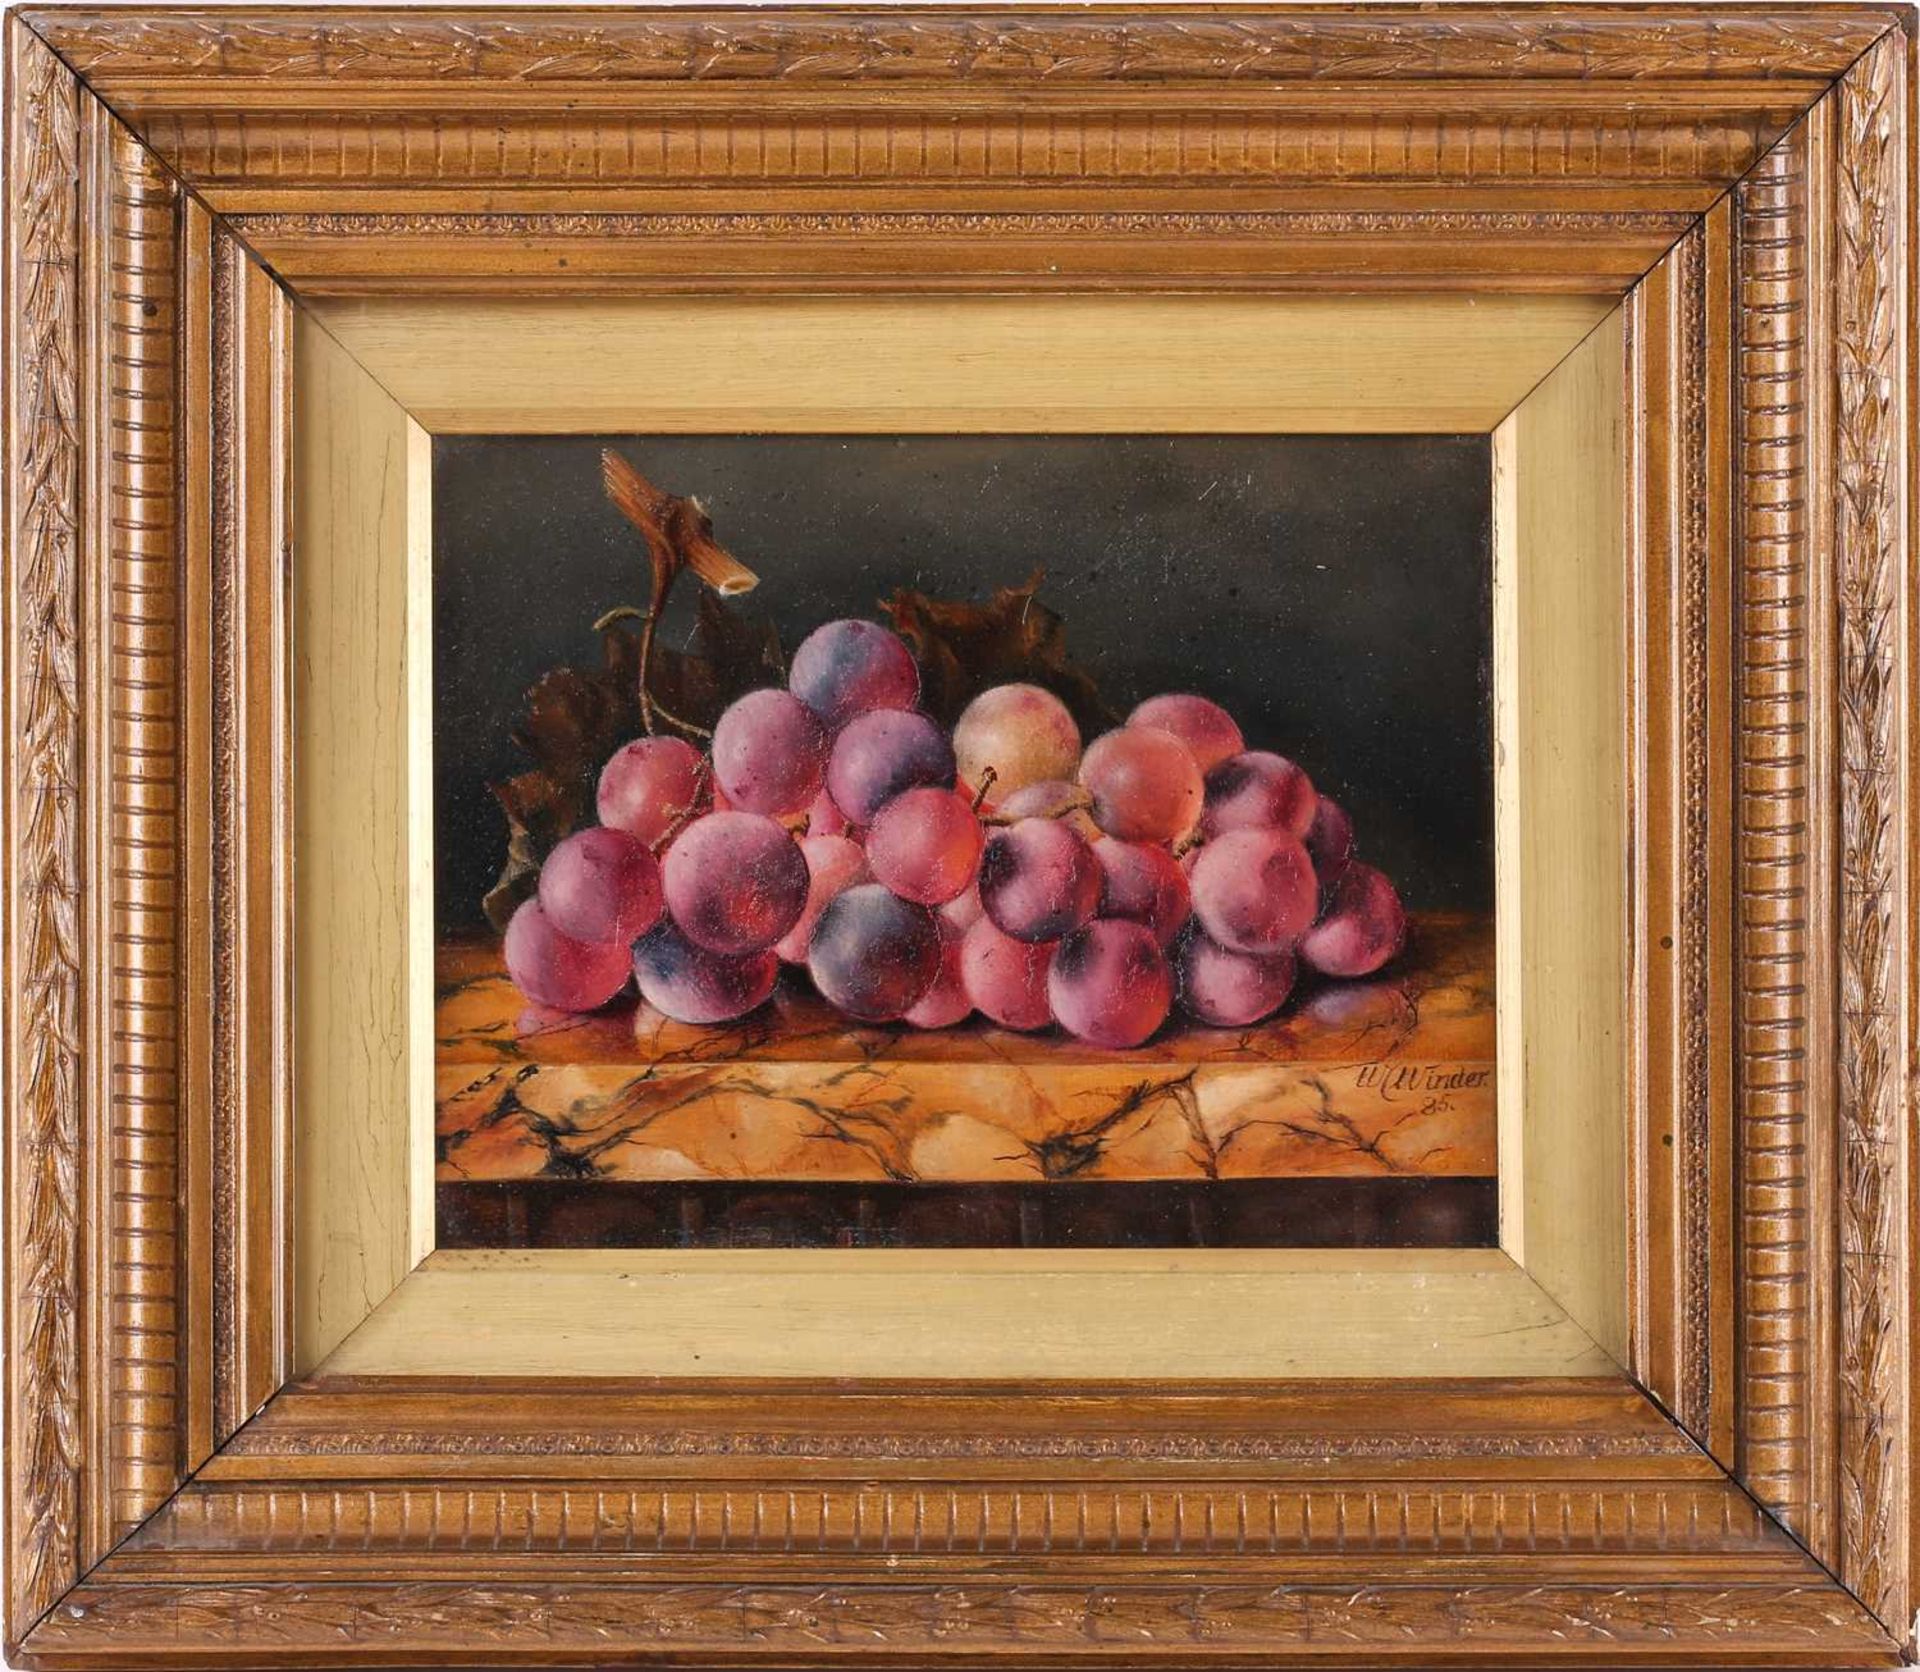 W. Winder (19th century), still life of grapes on marble, signed and dated '85, oil on panel, 17 x - Image 2 of 7